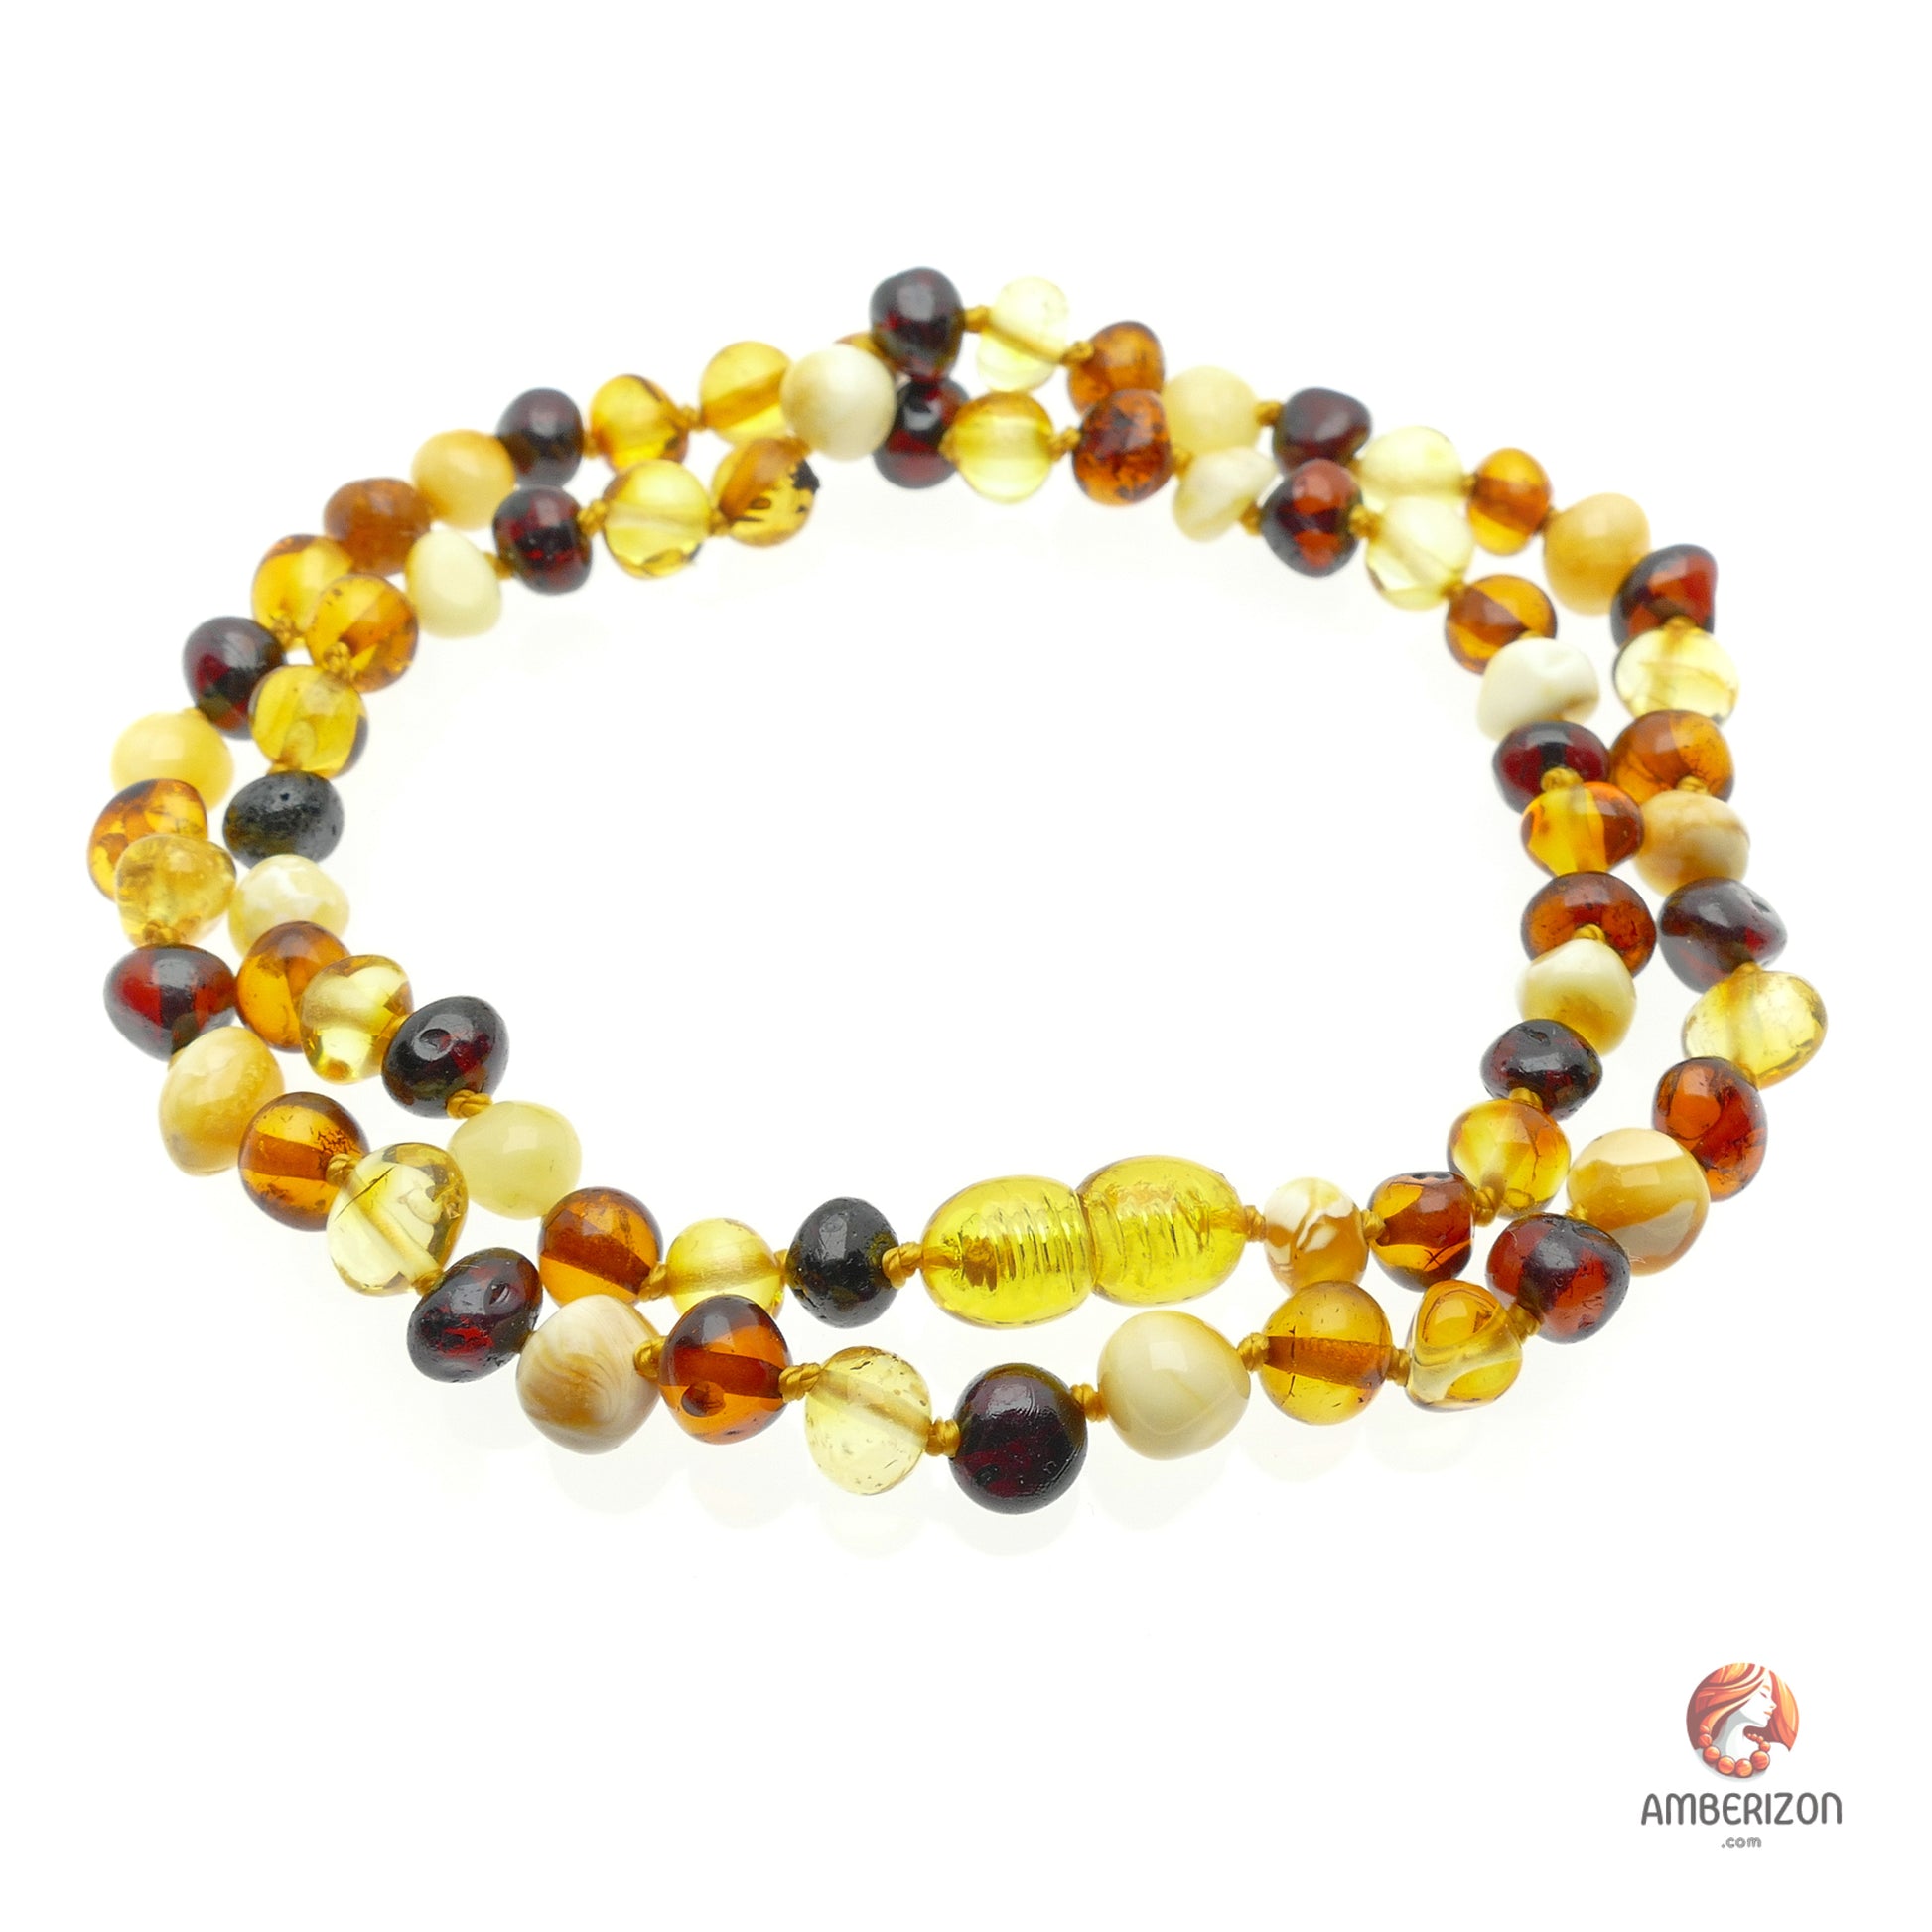 Certified Unisex Baltic Amber Necklace - Twist Barrel Clasp - Authentic